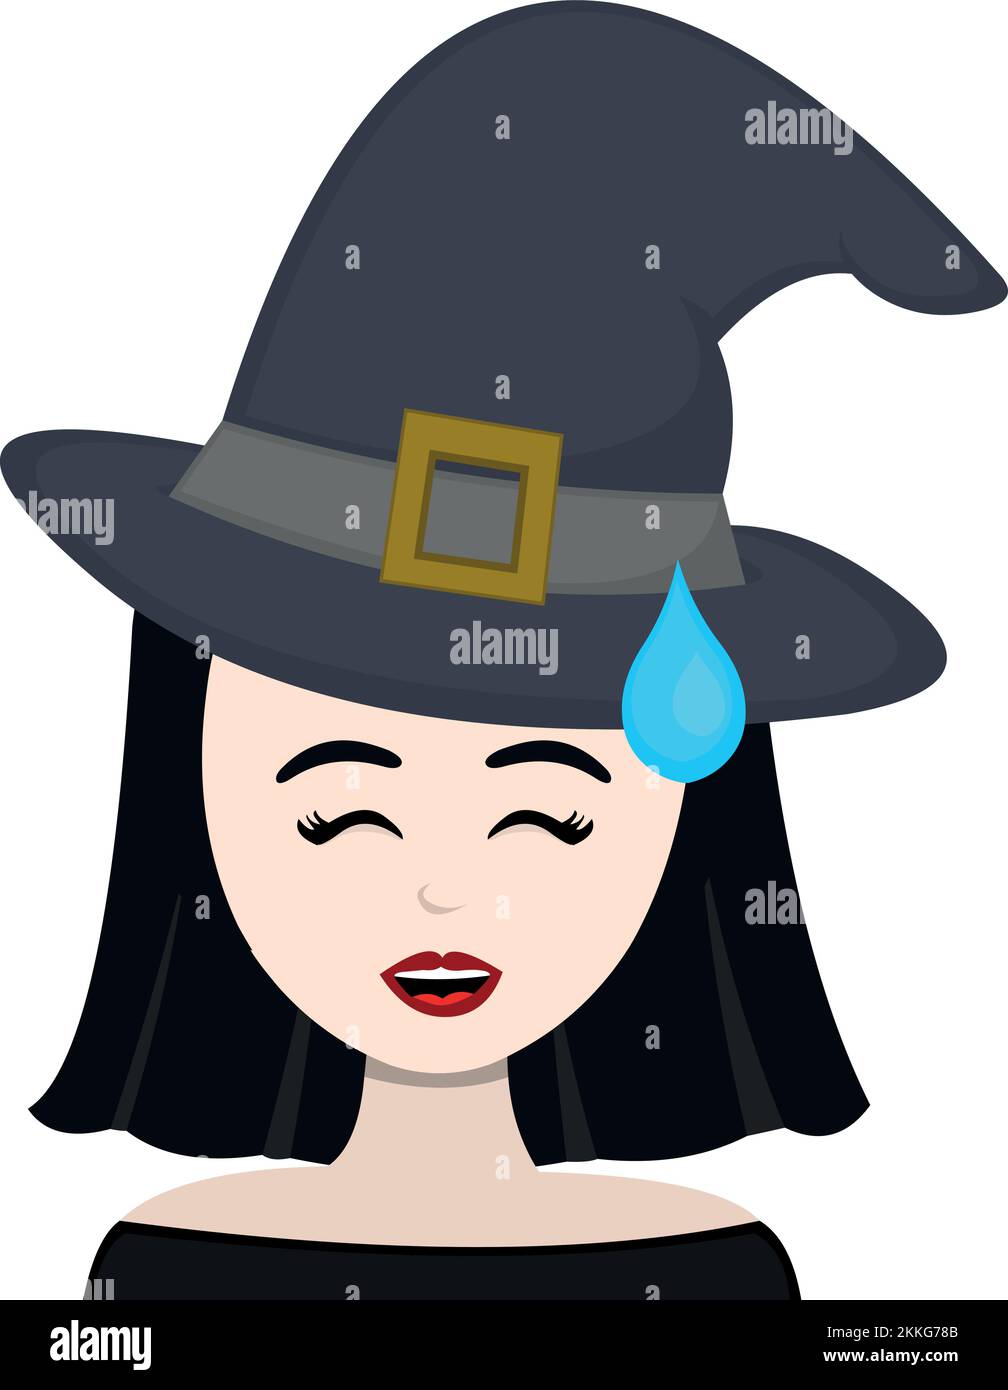 vector illustration of a cartoon witch with an embarrassed expression and a drop of sweat on her head Stock Vector